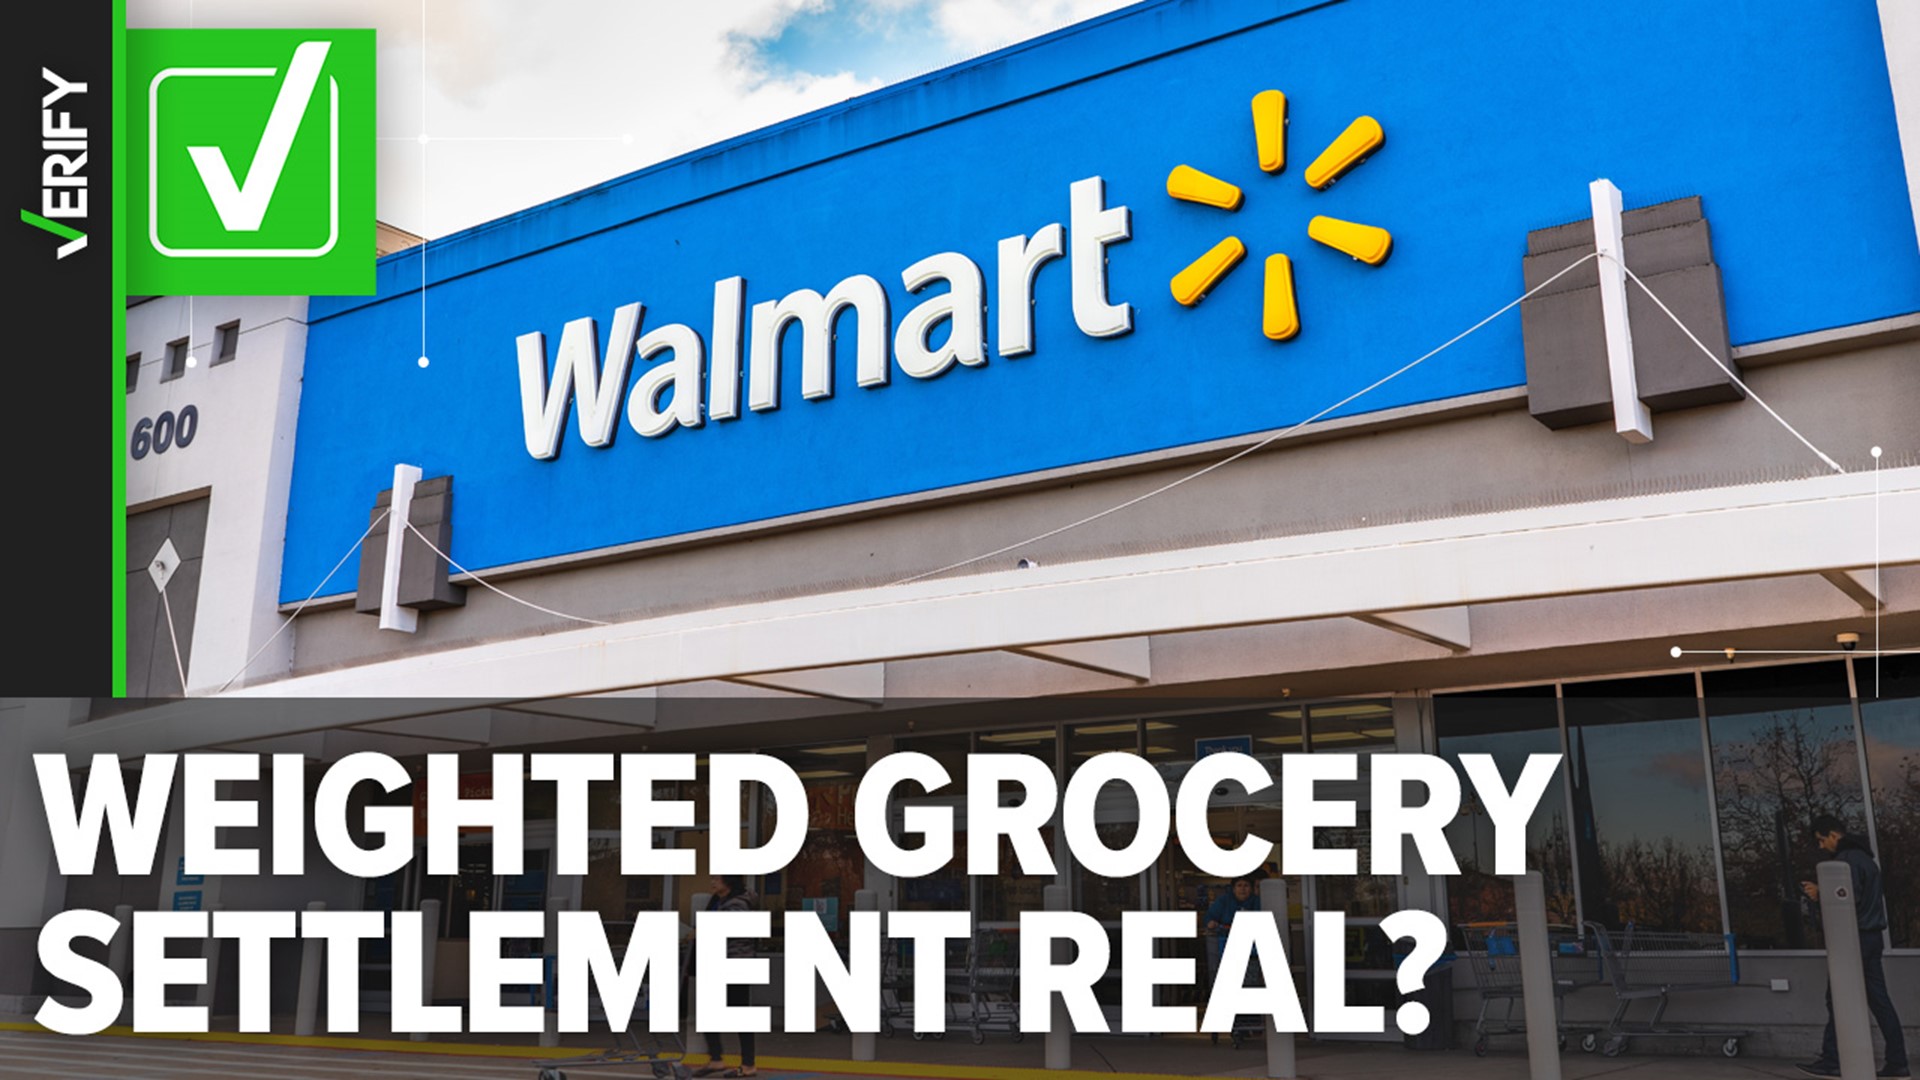 Walmart weighted grocery class action lawsuit settlement is real